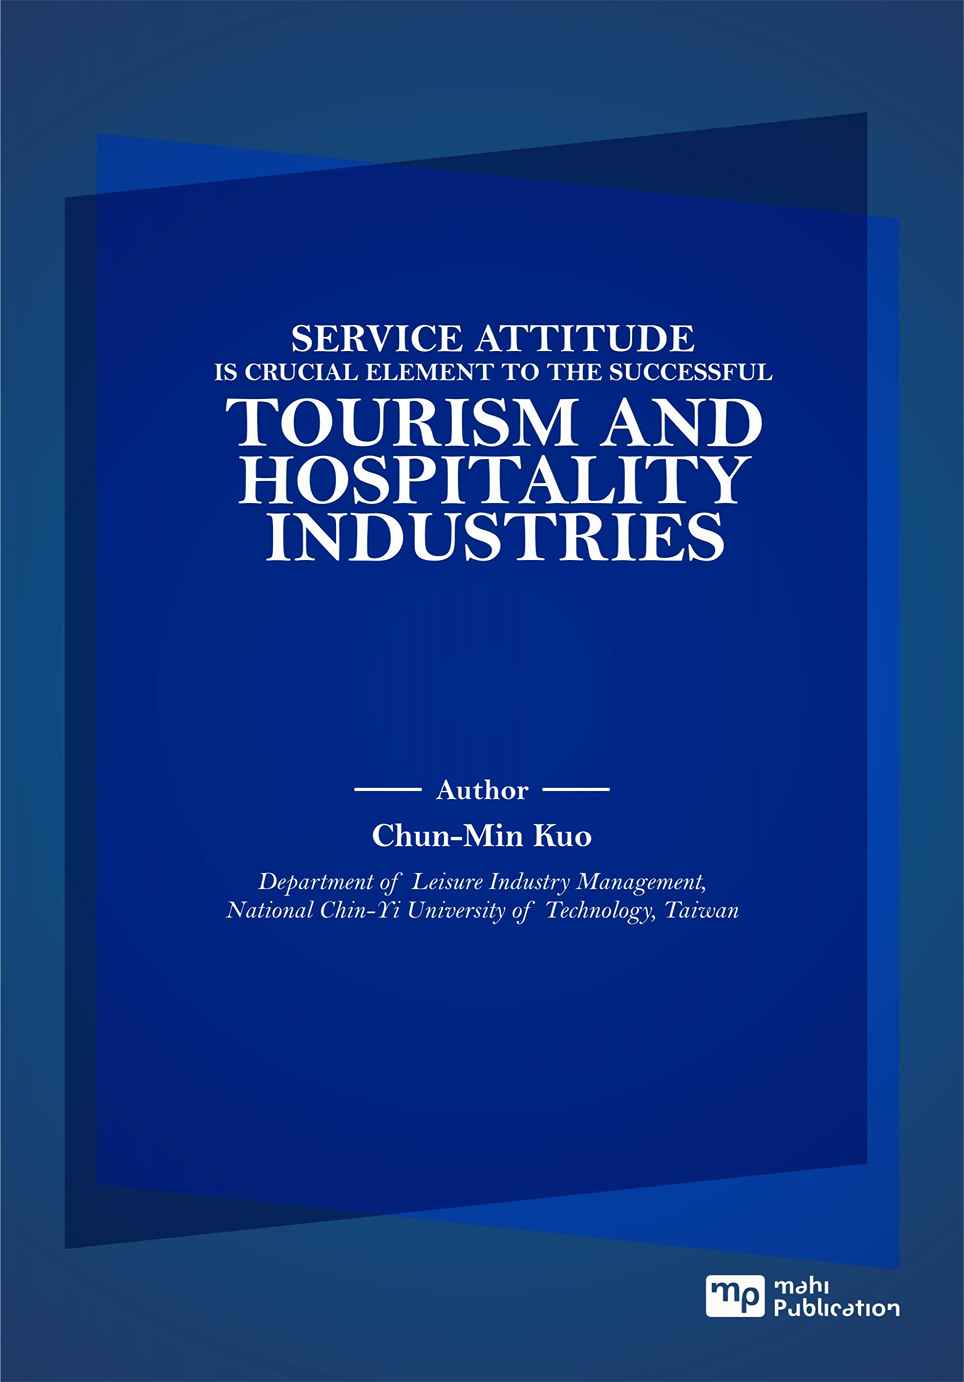 Service Attitude Is Crucial Element To The Successful Tourism And Hospitality Industries